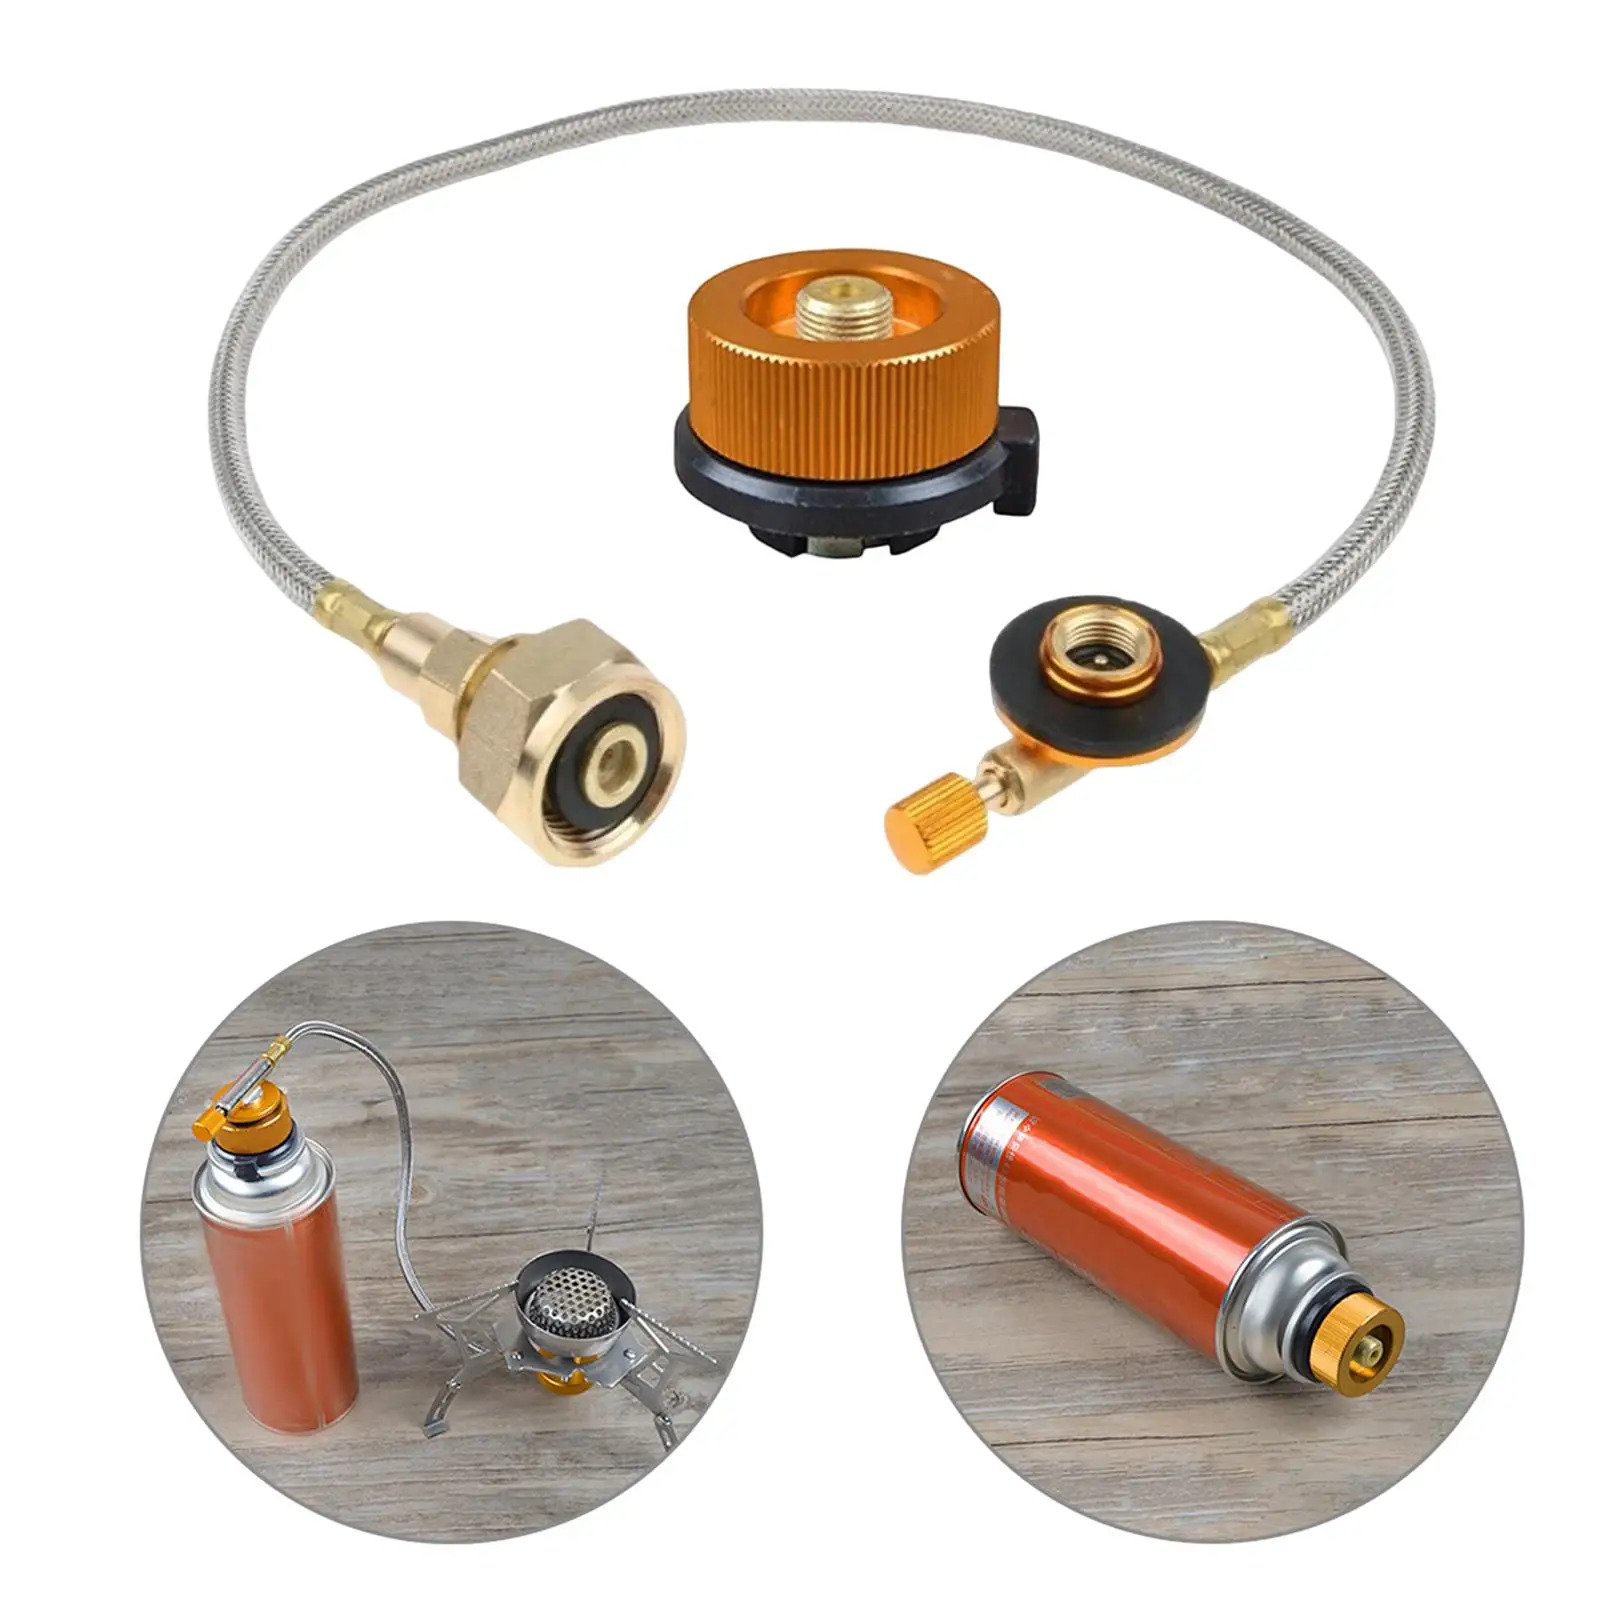 Camping Gas Stove Flat Cylinder Tank Coupler Bottle Refill Kit for BBQ